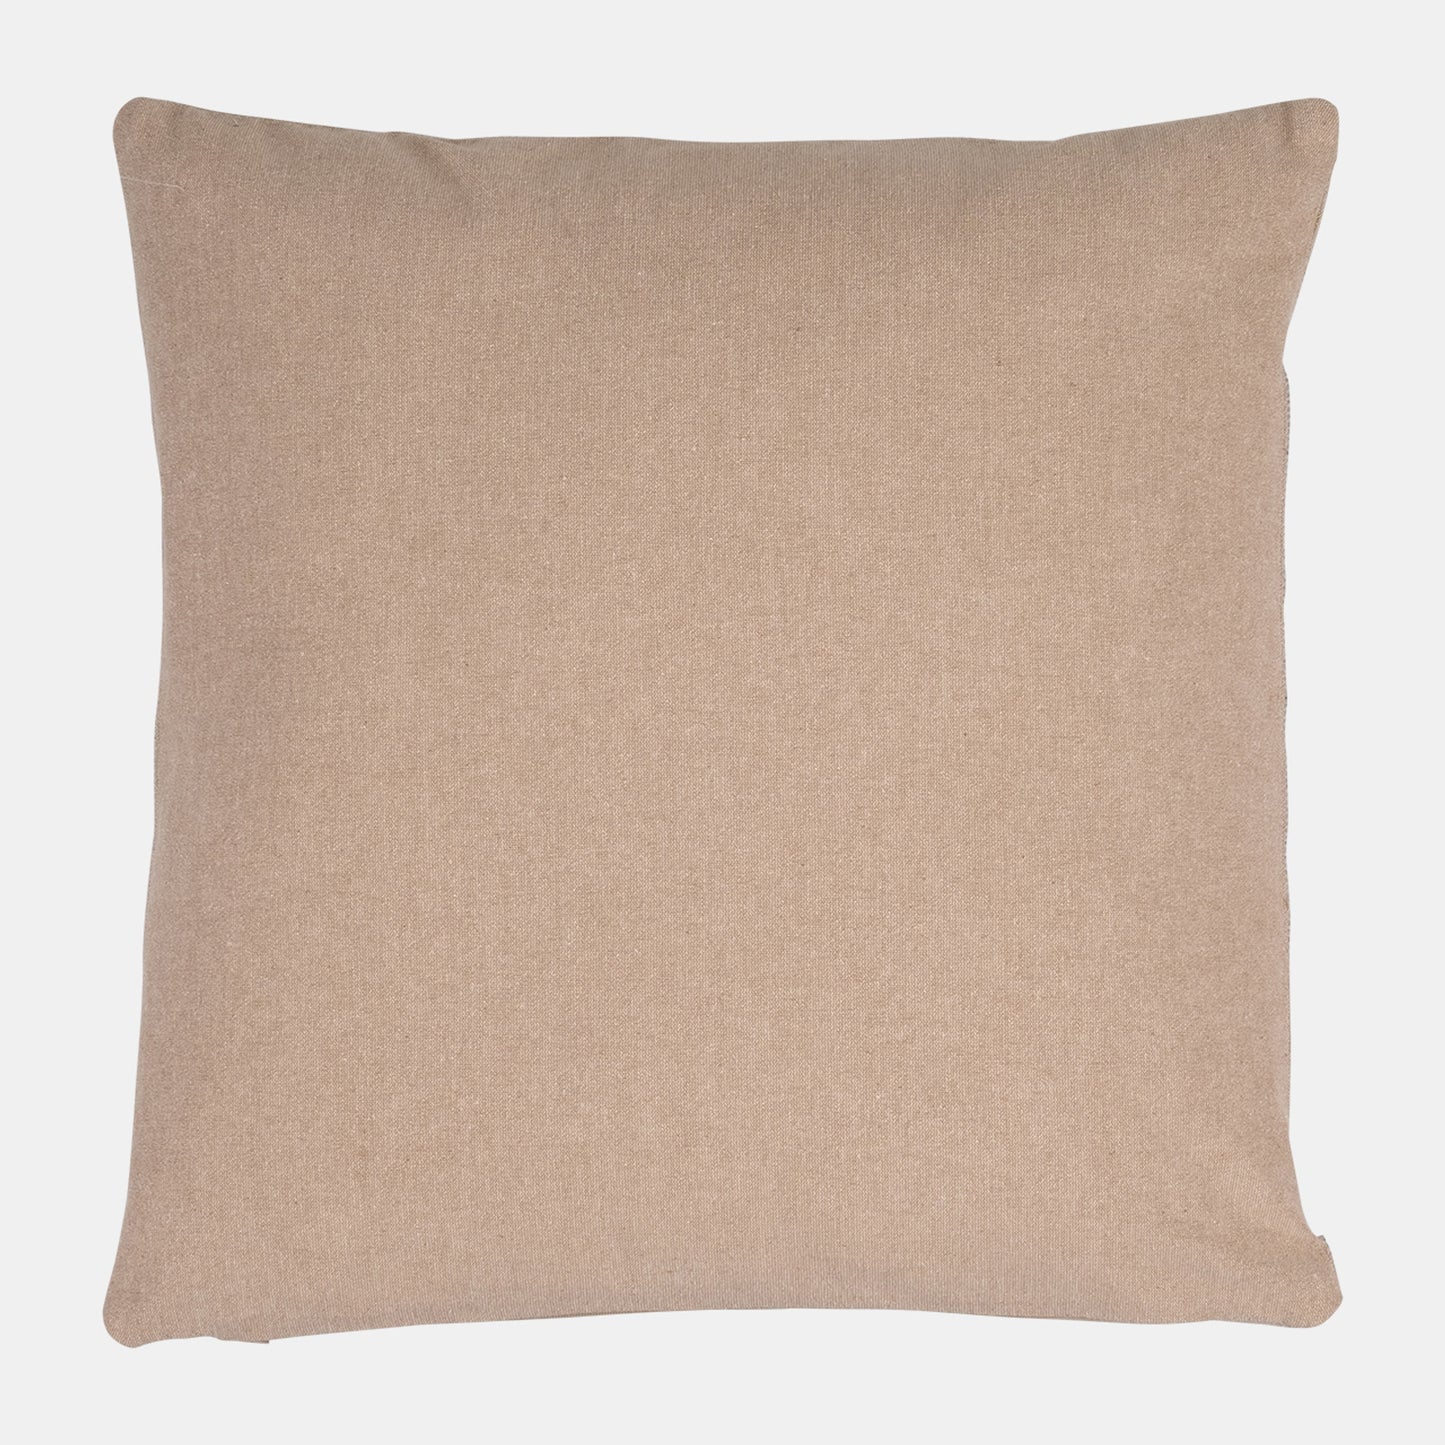 20 X 20 In. Leather & Geomatric Patch Decorative Pillow